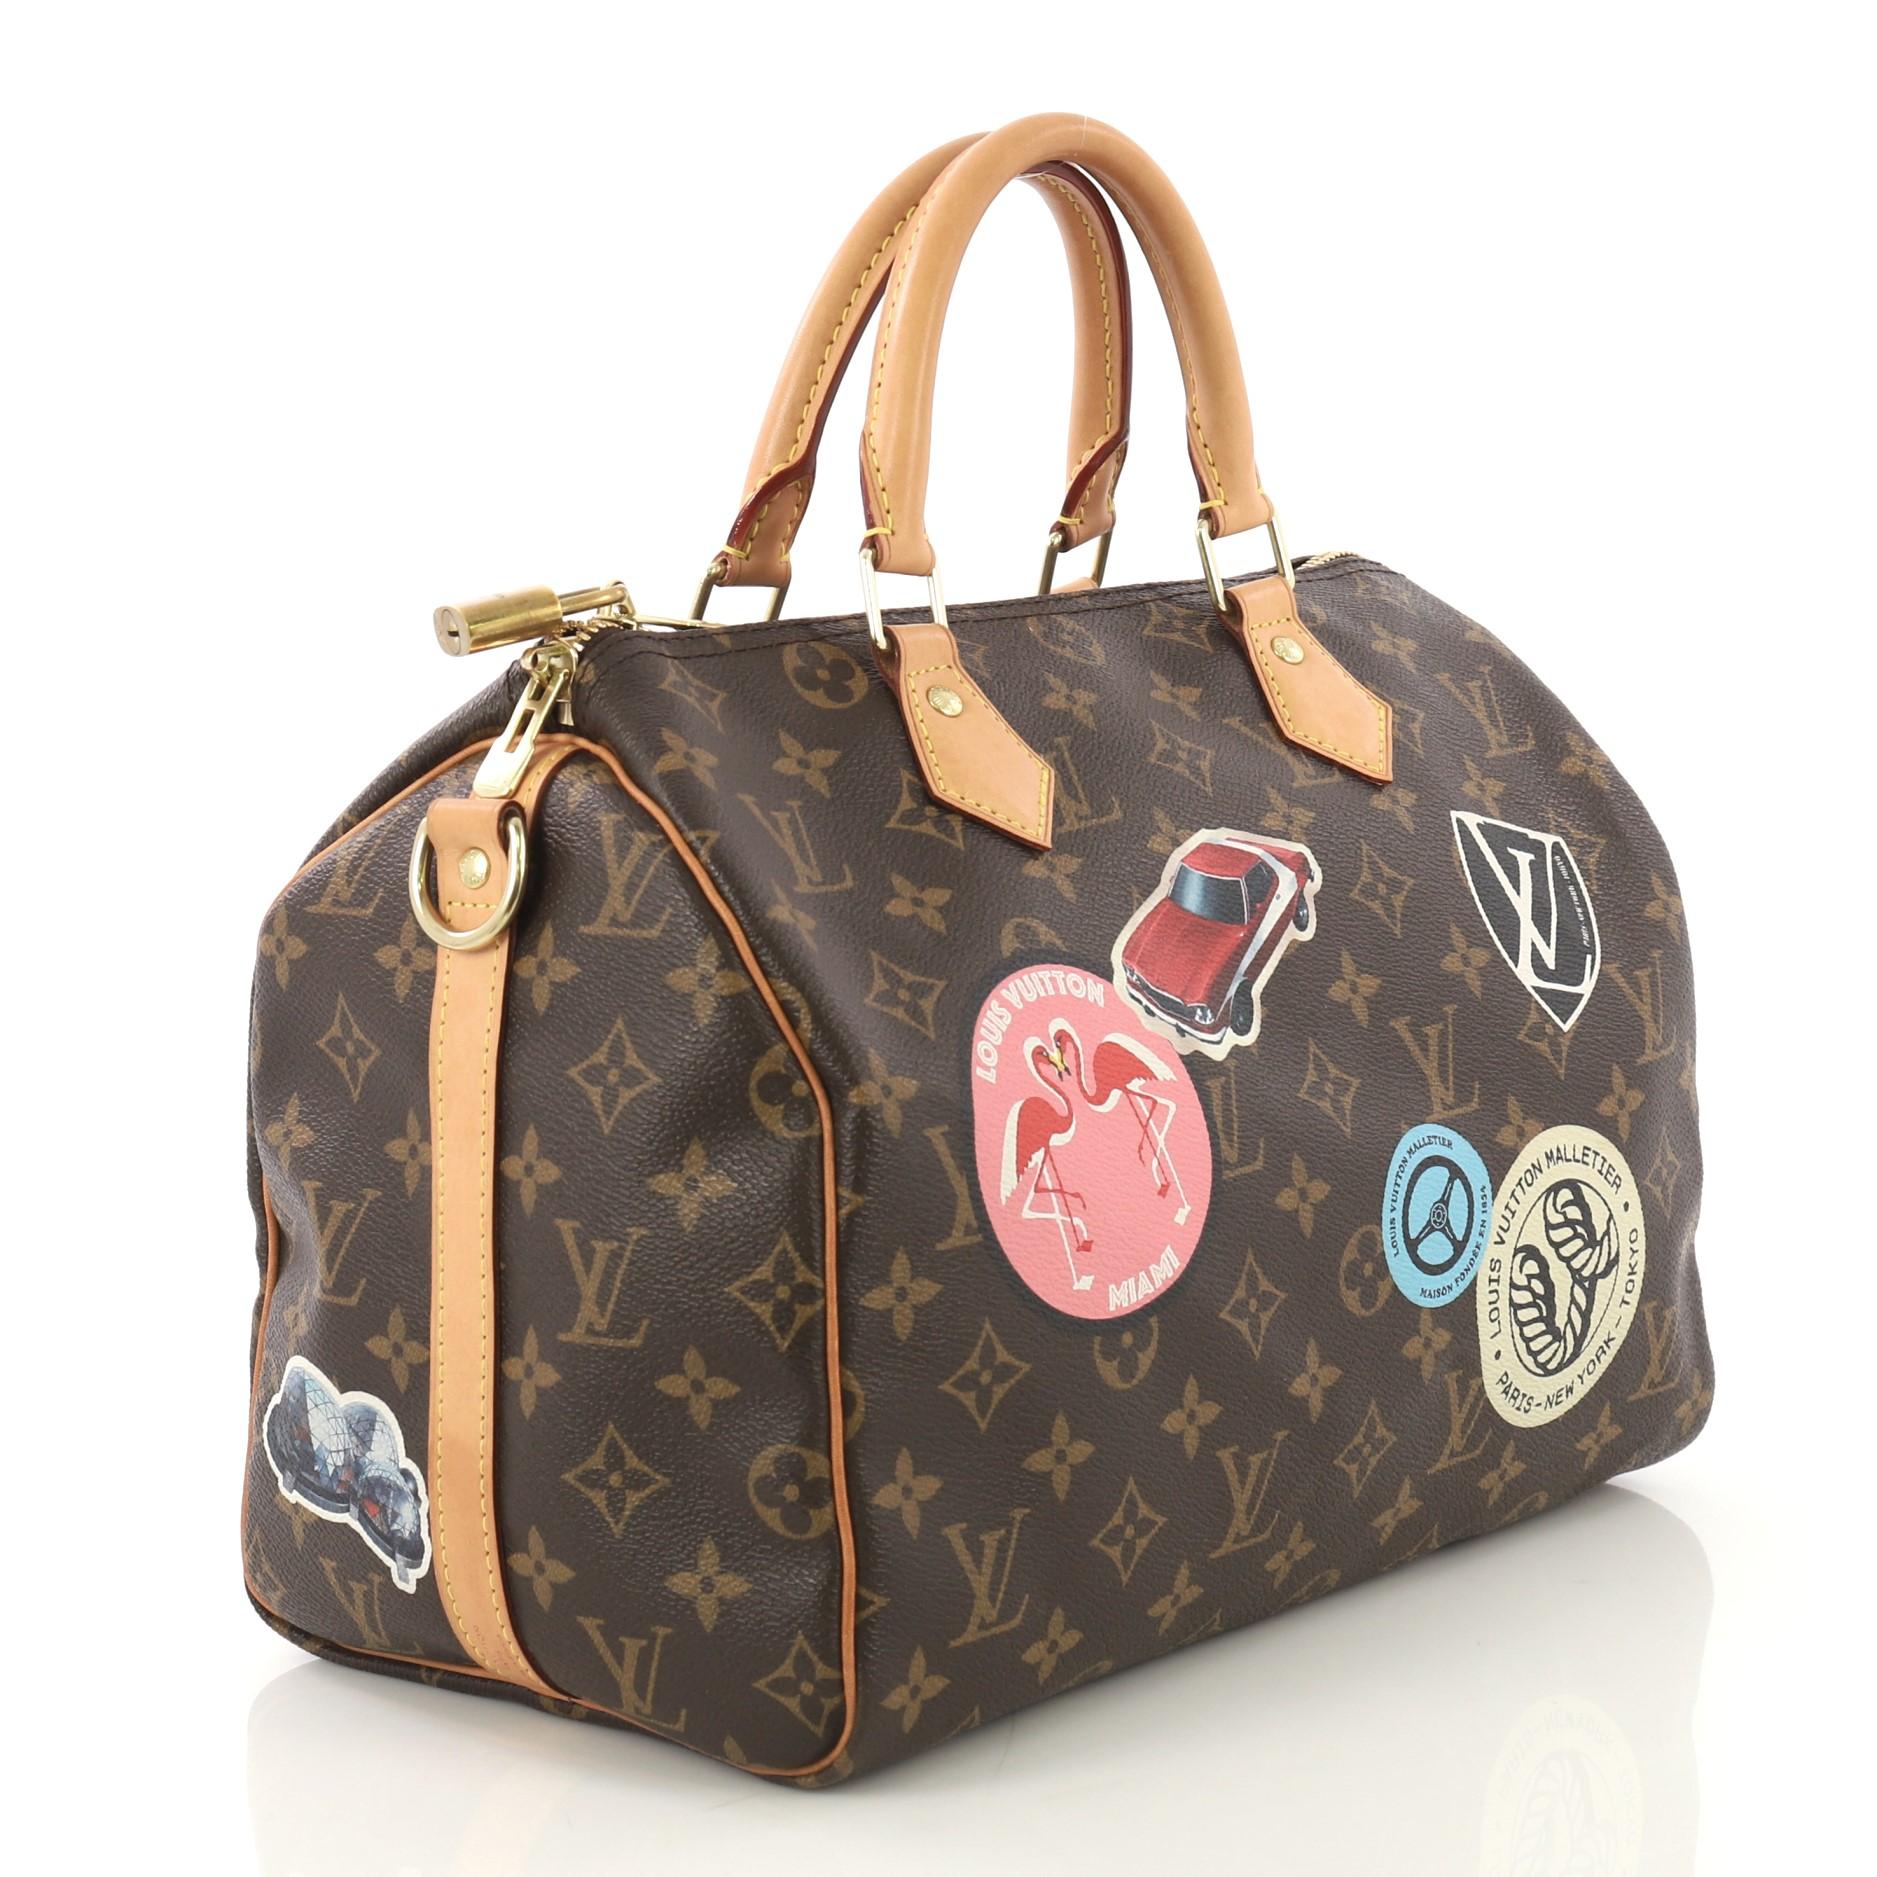 This Louis Vuitton Speedy Bandouliere Bag Limited Edition World Tour Monogram Canvas 30, crafted from brown monogram coated canvas, features dual rolled vachetta leather handles and trim, World Tour-themed stickers, and gold-tone hardware. Its